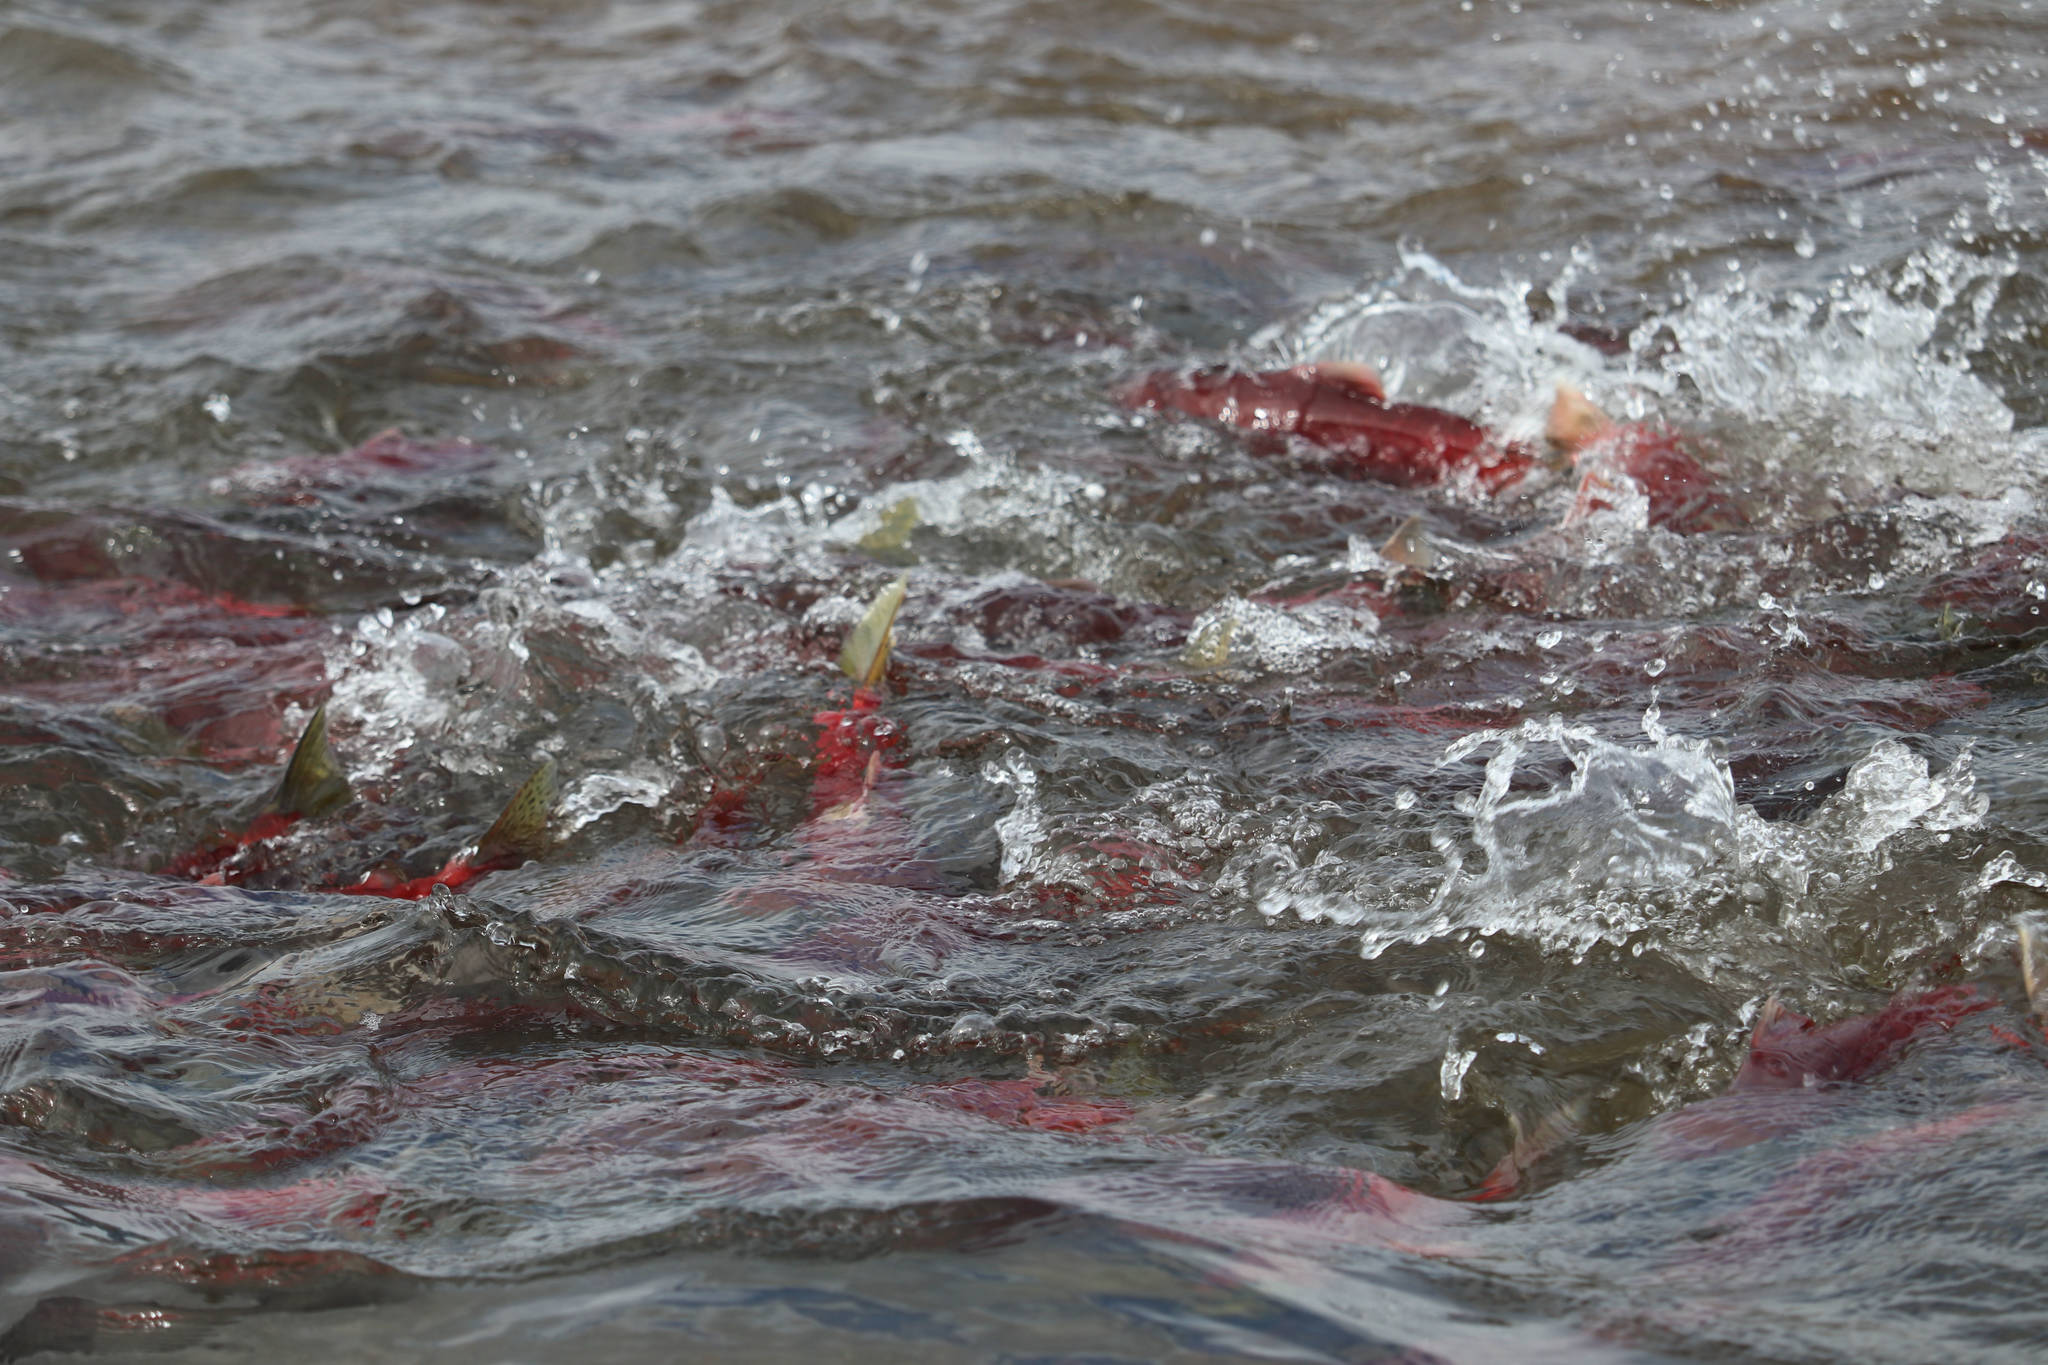 Sockeye salmon school up at the mouth of Uno Creek off Beverley Lake in the Bristol Bay watershed on August 10, 2018. Mary Catharine Martin | SalmonState